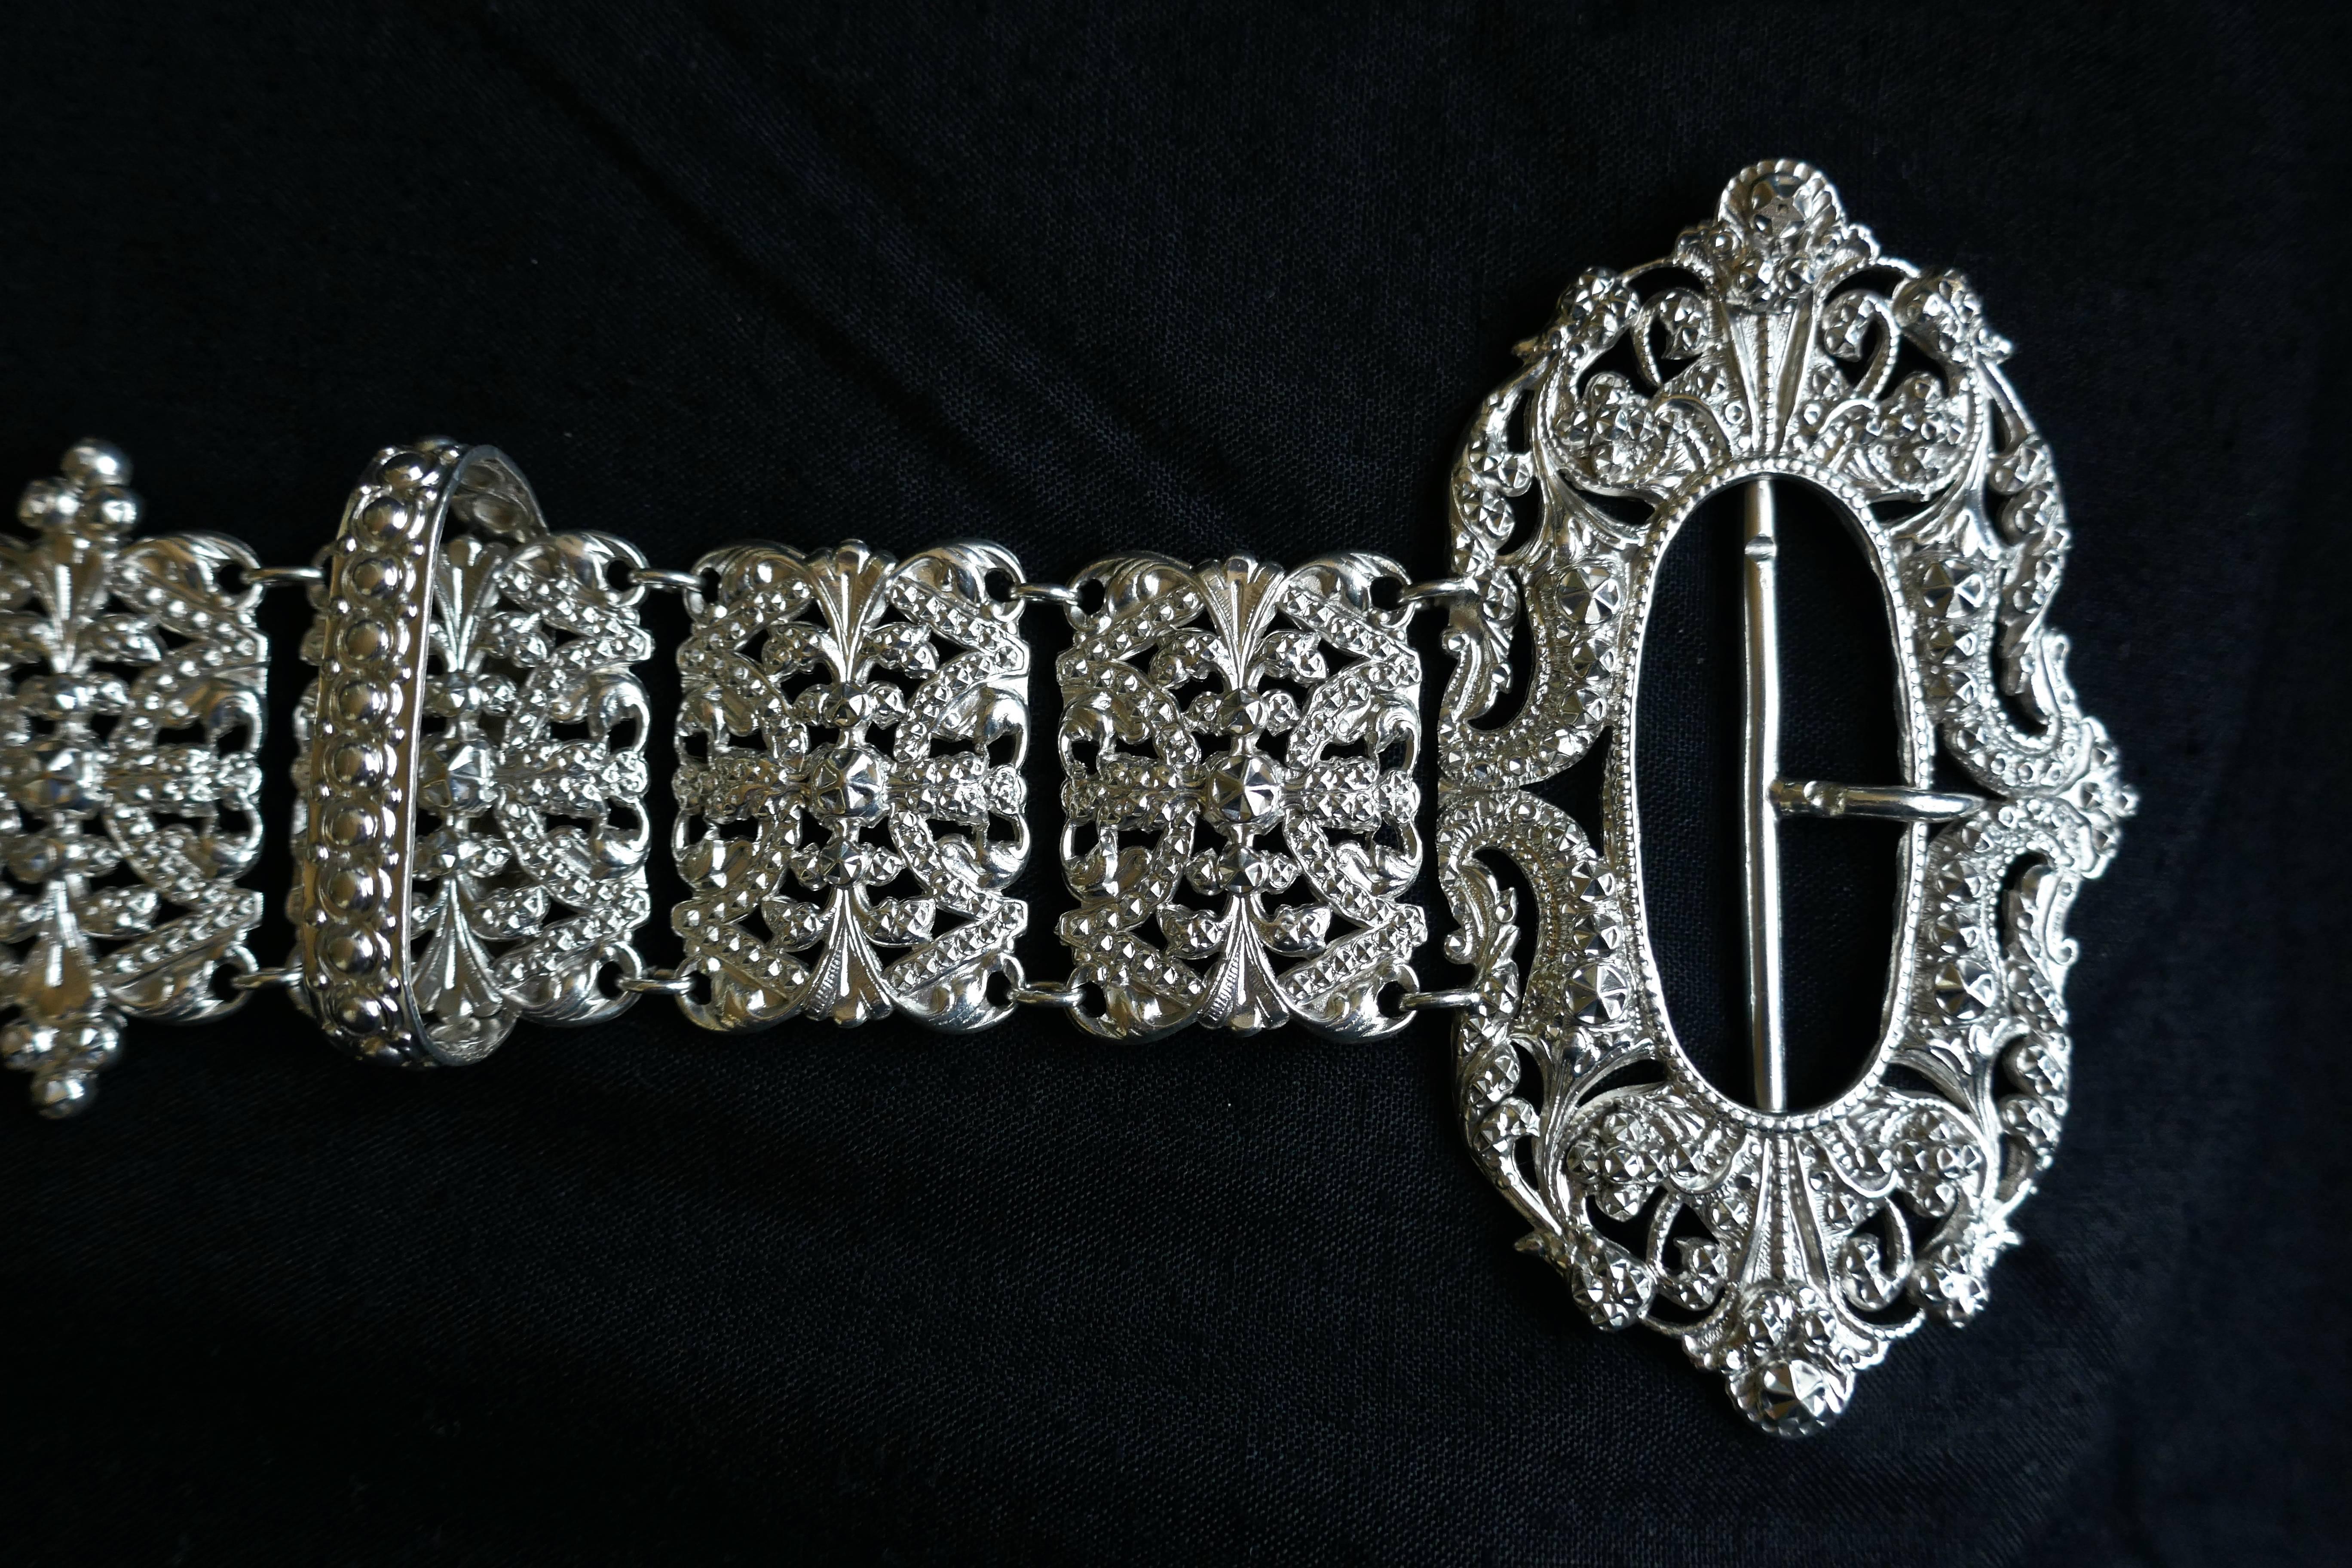 20th Century French Arts and Crafts Silver Belt, Articulated Links with Chatelaine Ring For Sale